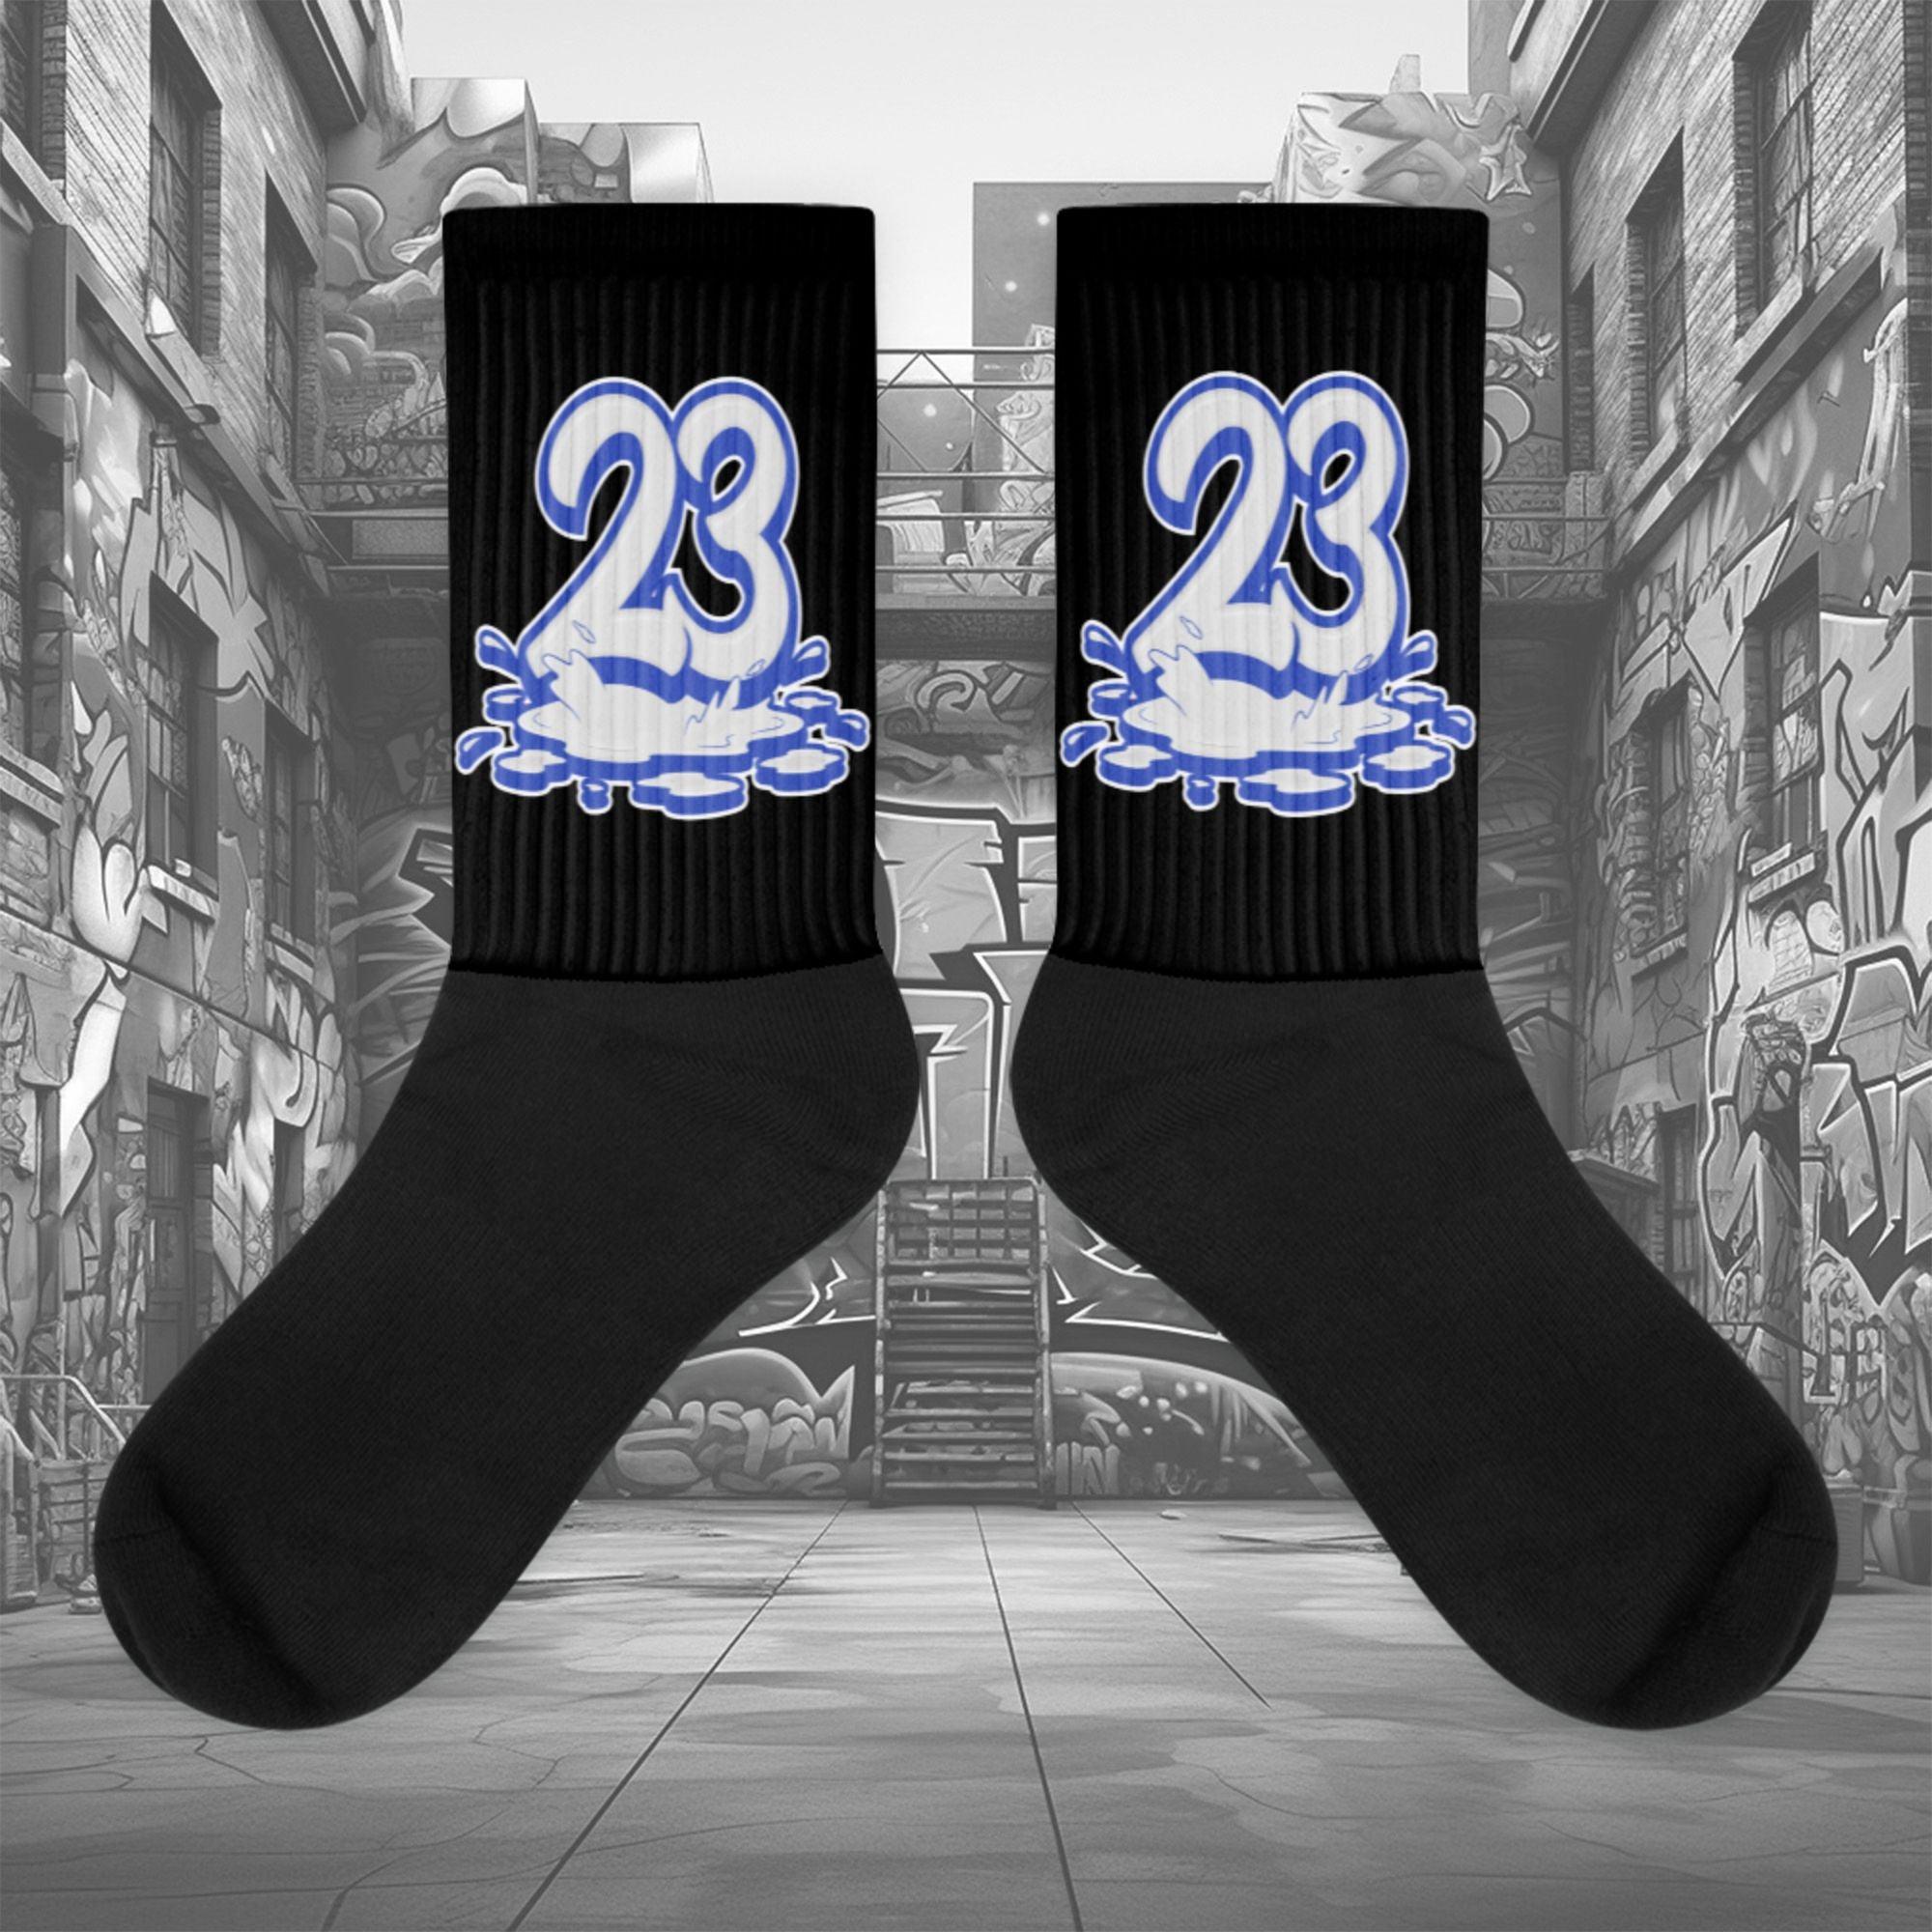  Showcases the view of the socks, highlighting the vibrant ' MEDUSA ' design, which perfectly complements the Nike Dunk Disrupt 2 Hyper Royal sneakers. The intricate pattern and color scheme inspired by the  theme are prominently displayed.  Focusing on the ribbed leg , cusioned bottoms and the snug fit of the socks. This angle provides a clear view of the texture and quality of the material blend.